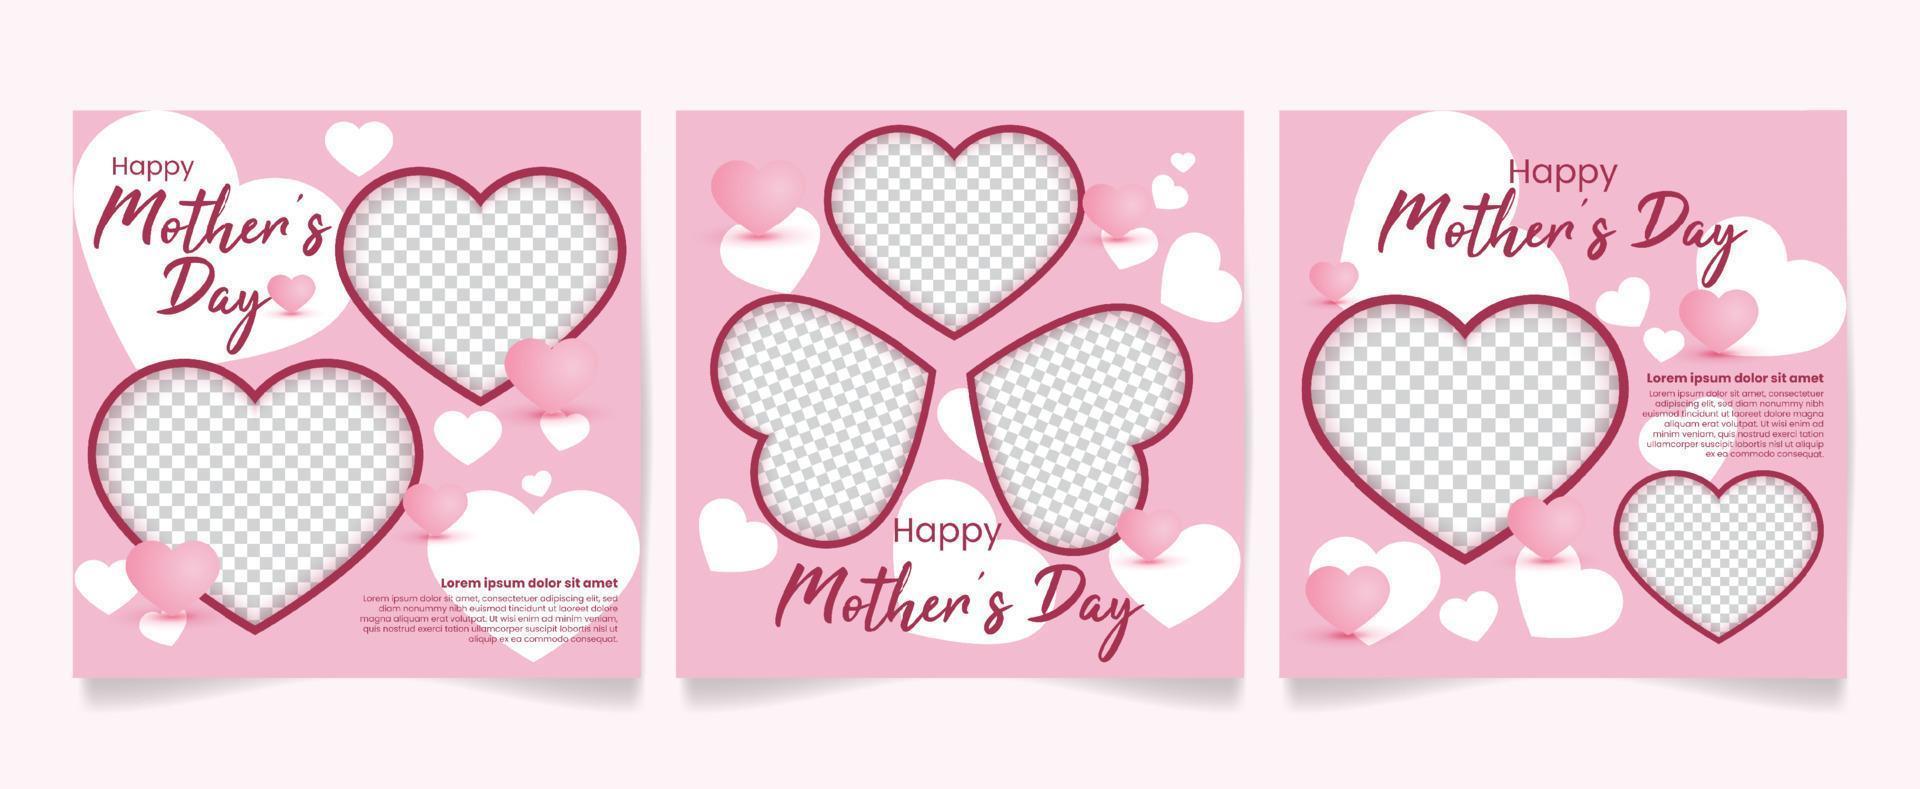 Happy Mother's Day Social Media Post Template rosa Farbe mit Liebessymbol vektor